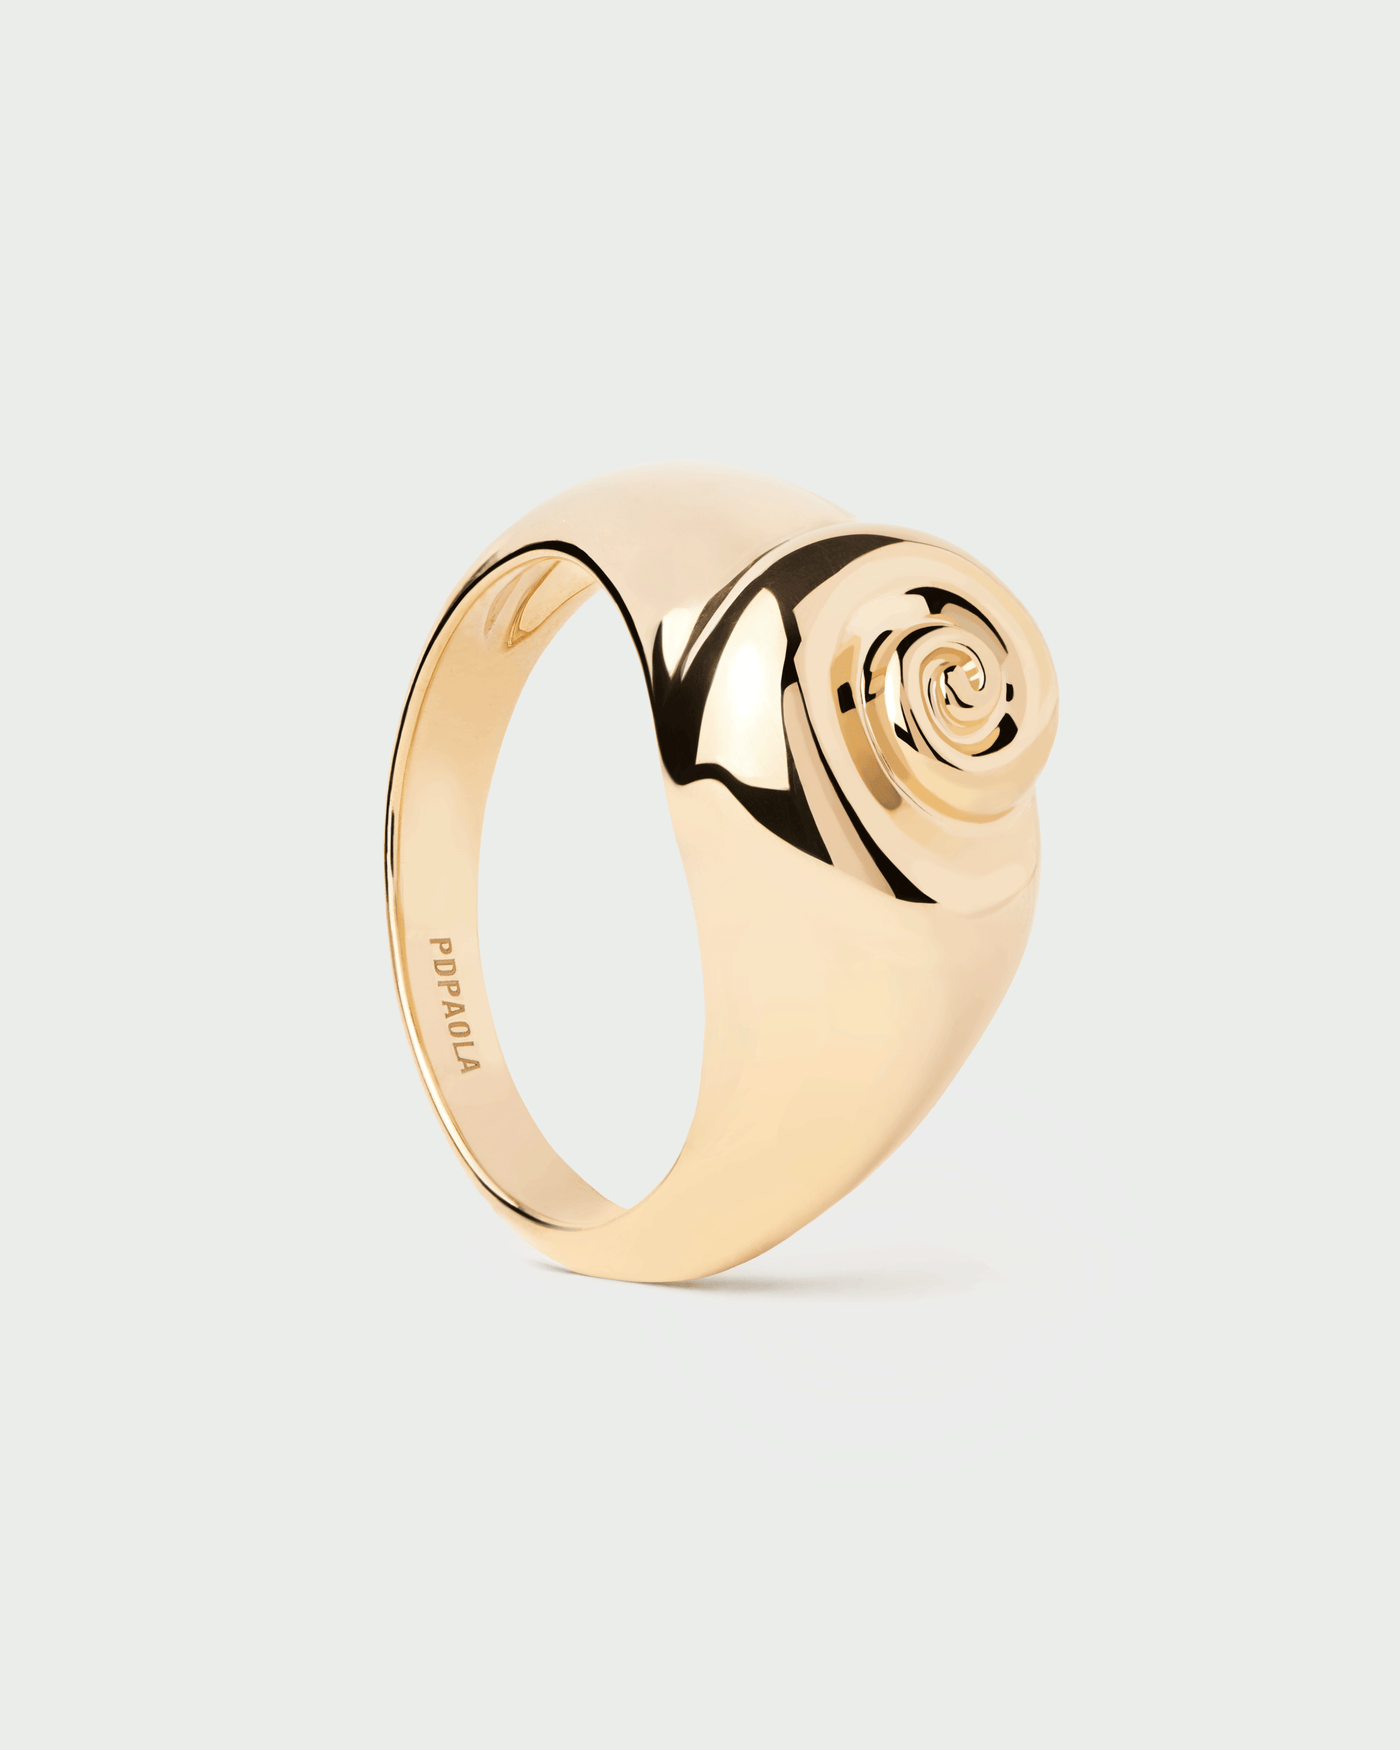 Shell ring. Gold-plated distinctive signet ring with a sea snail motif  . Get the latest arrival from PDPAOLA. Place your order safely and get this Best Seller.